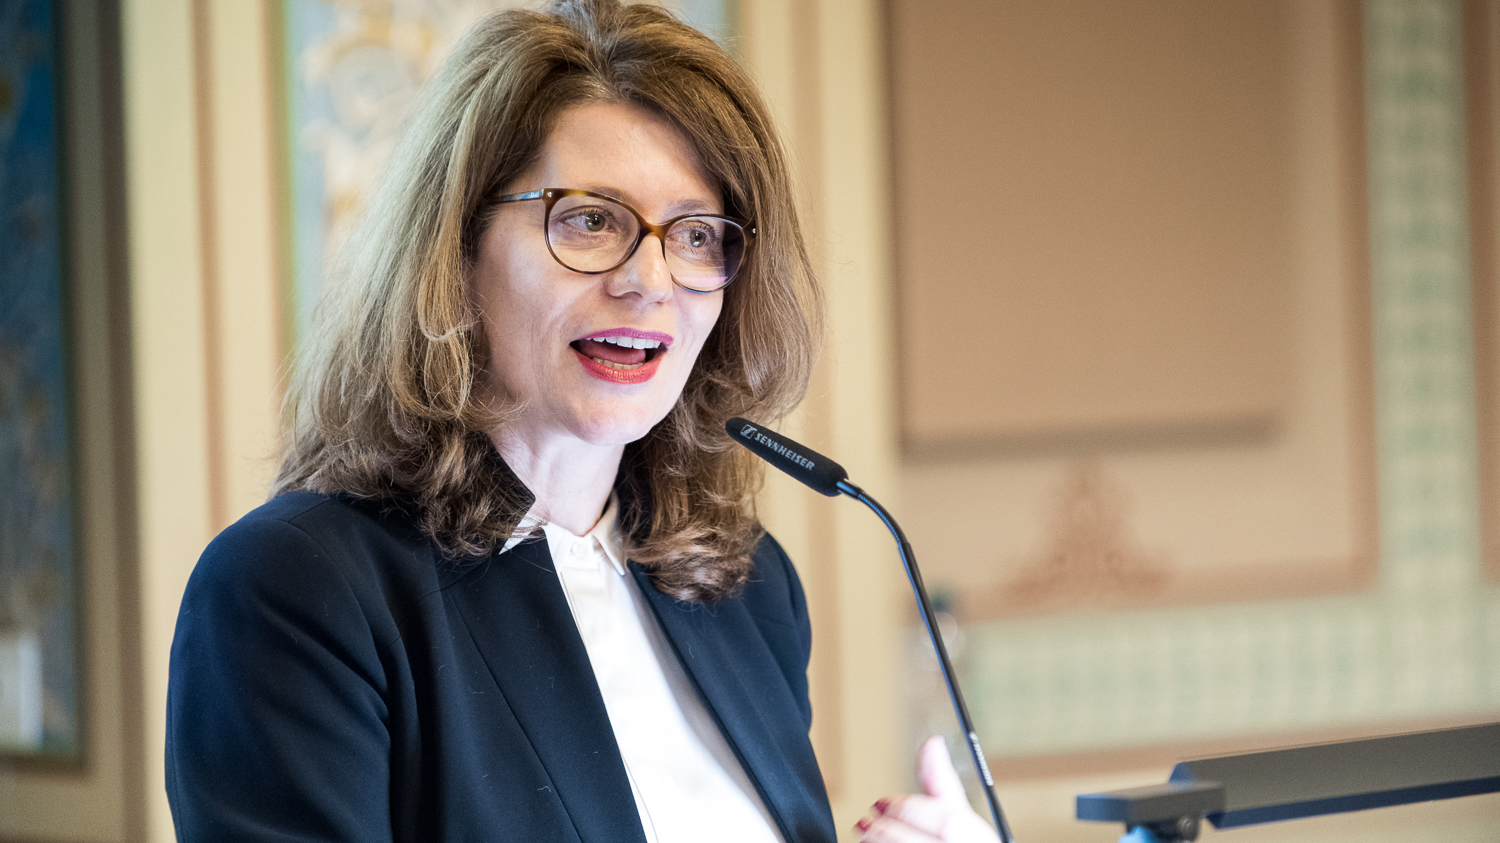 “A plaque will be erected in memory of the pioneer Nadezhda Suslova,” said Professor Tatiana Crivelli Speciale, President of the UZH Gender Equality Commission. (Picture: Frank Brüderli)